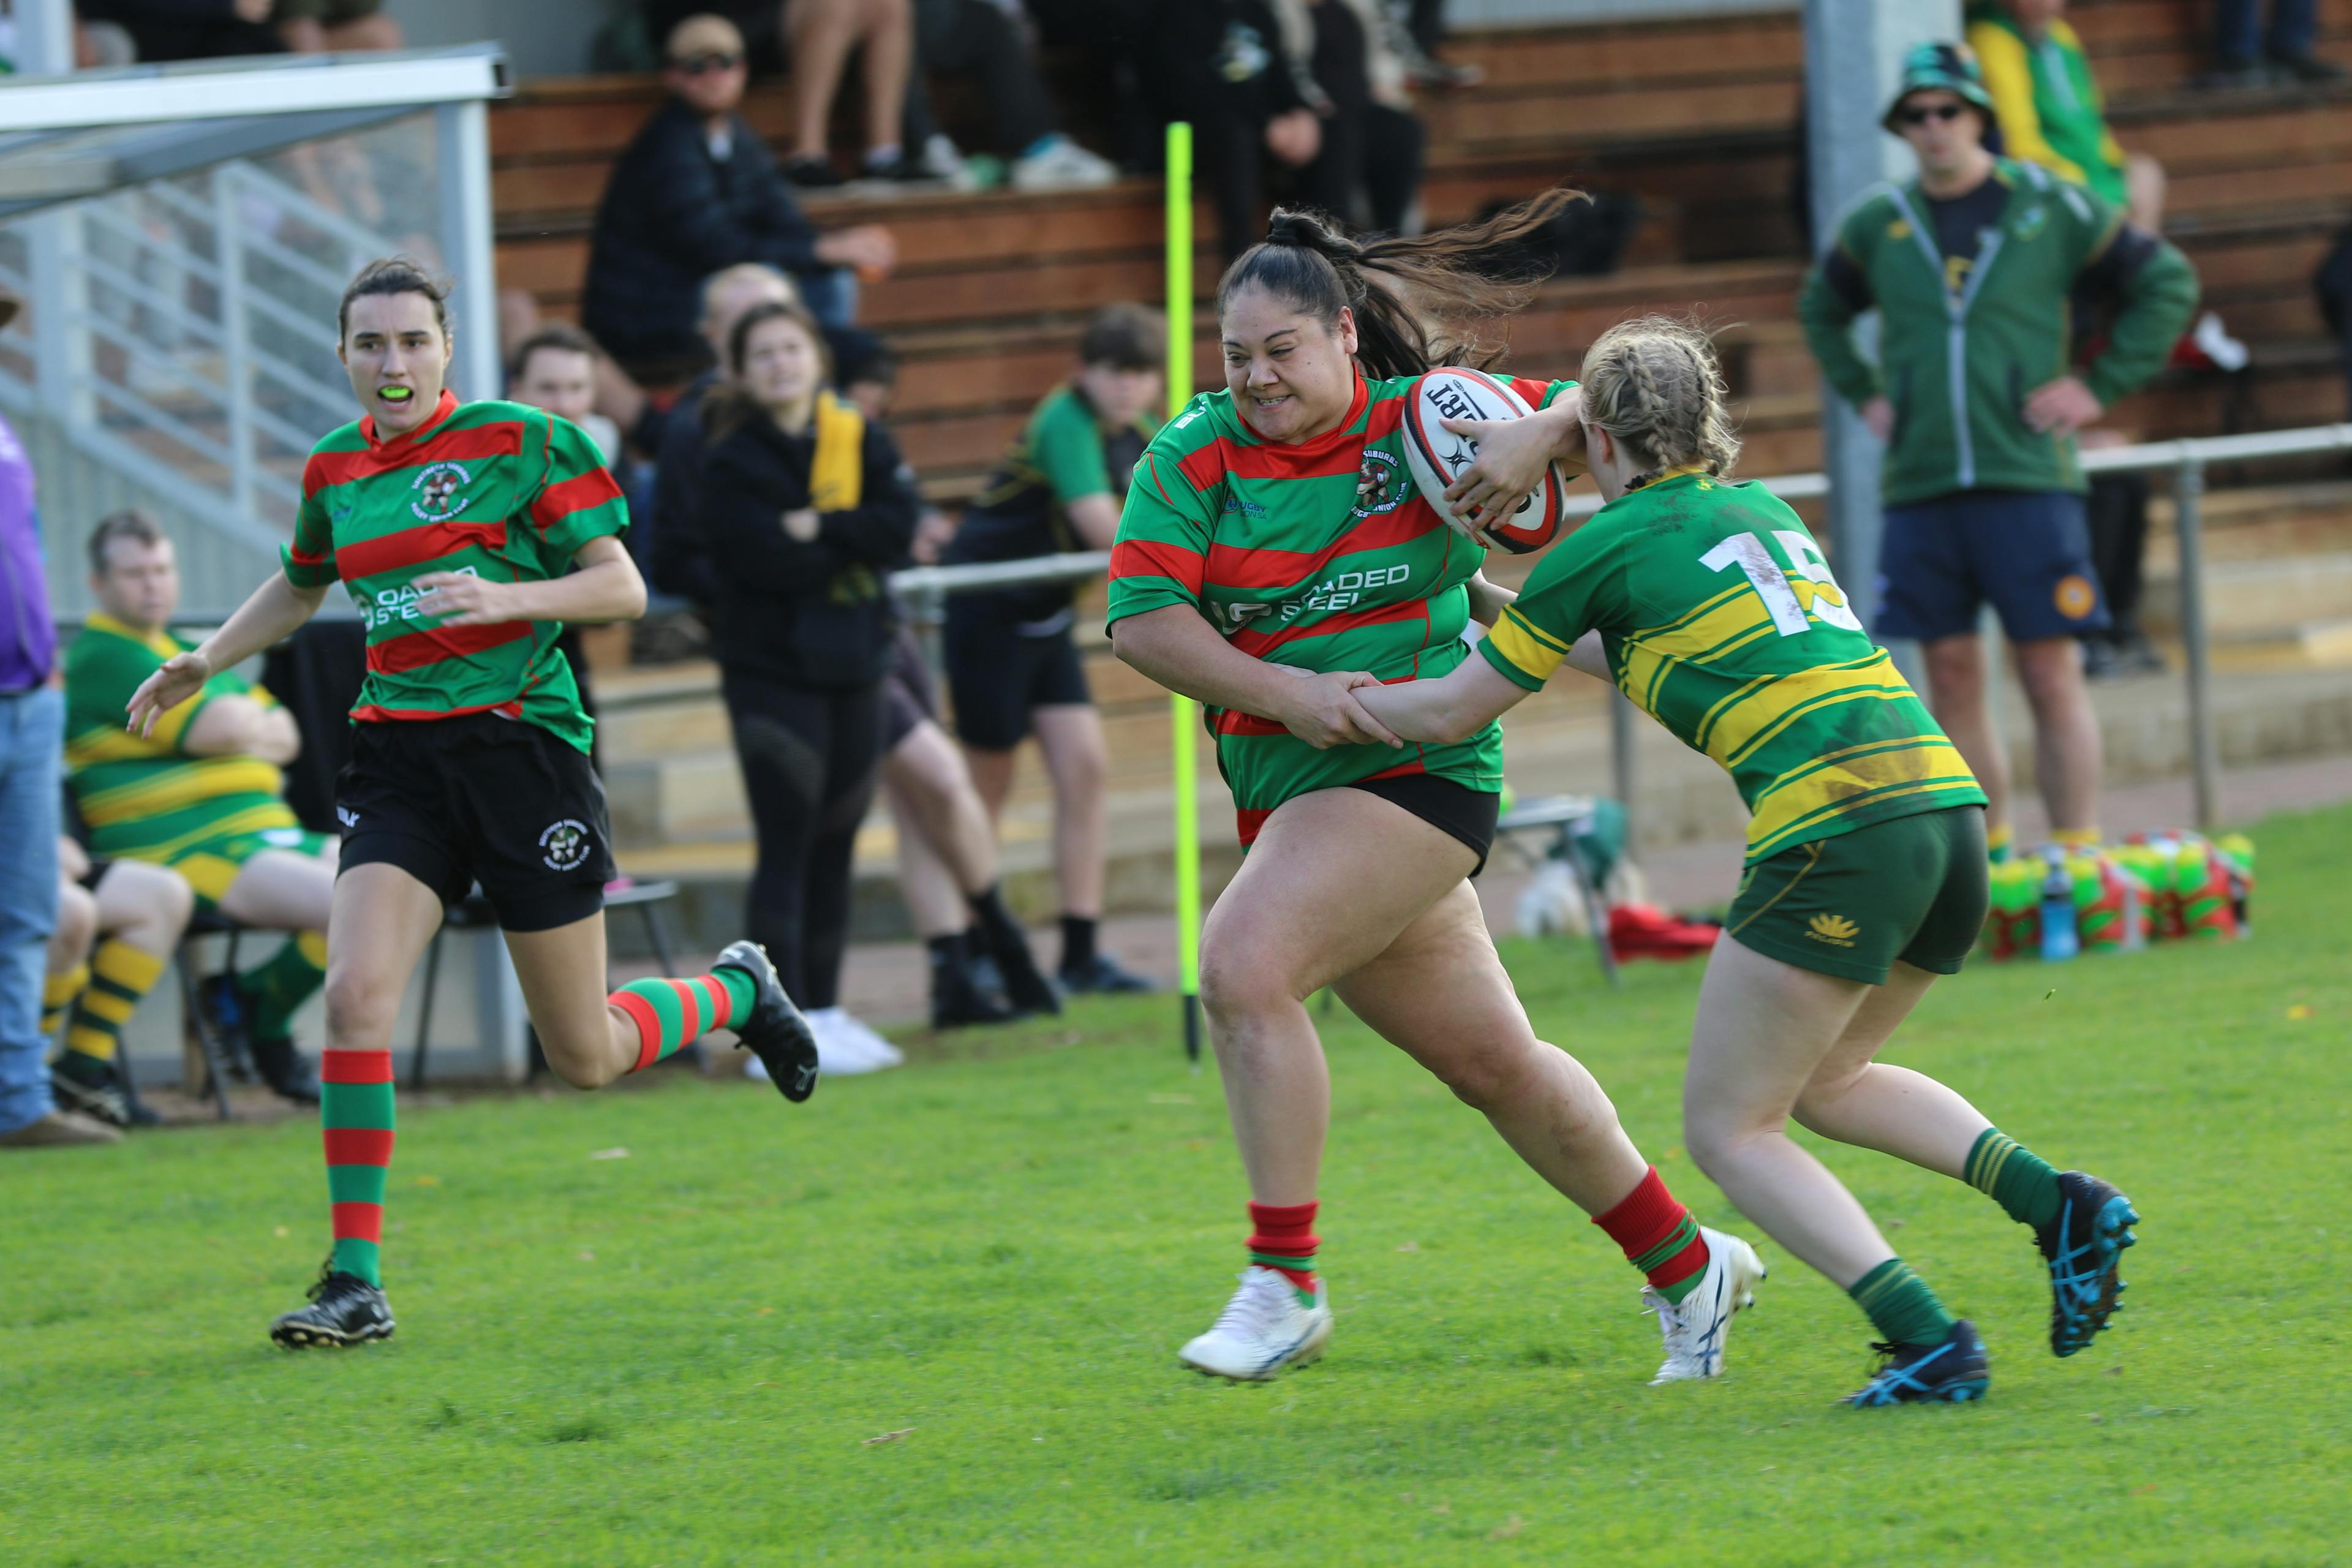 ON THE CHARGE: Souths' Teanu Karpani en route to the tryline against Woodville during their Round 6 fixture at AA Bailey. Picture: RUSA